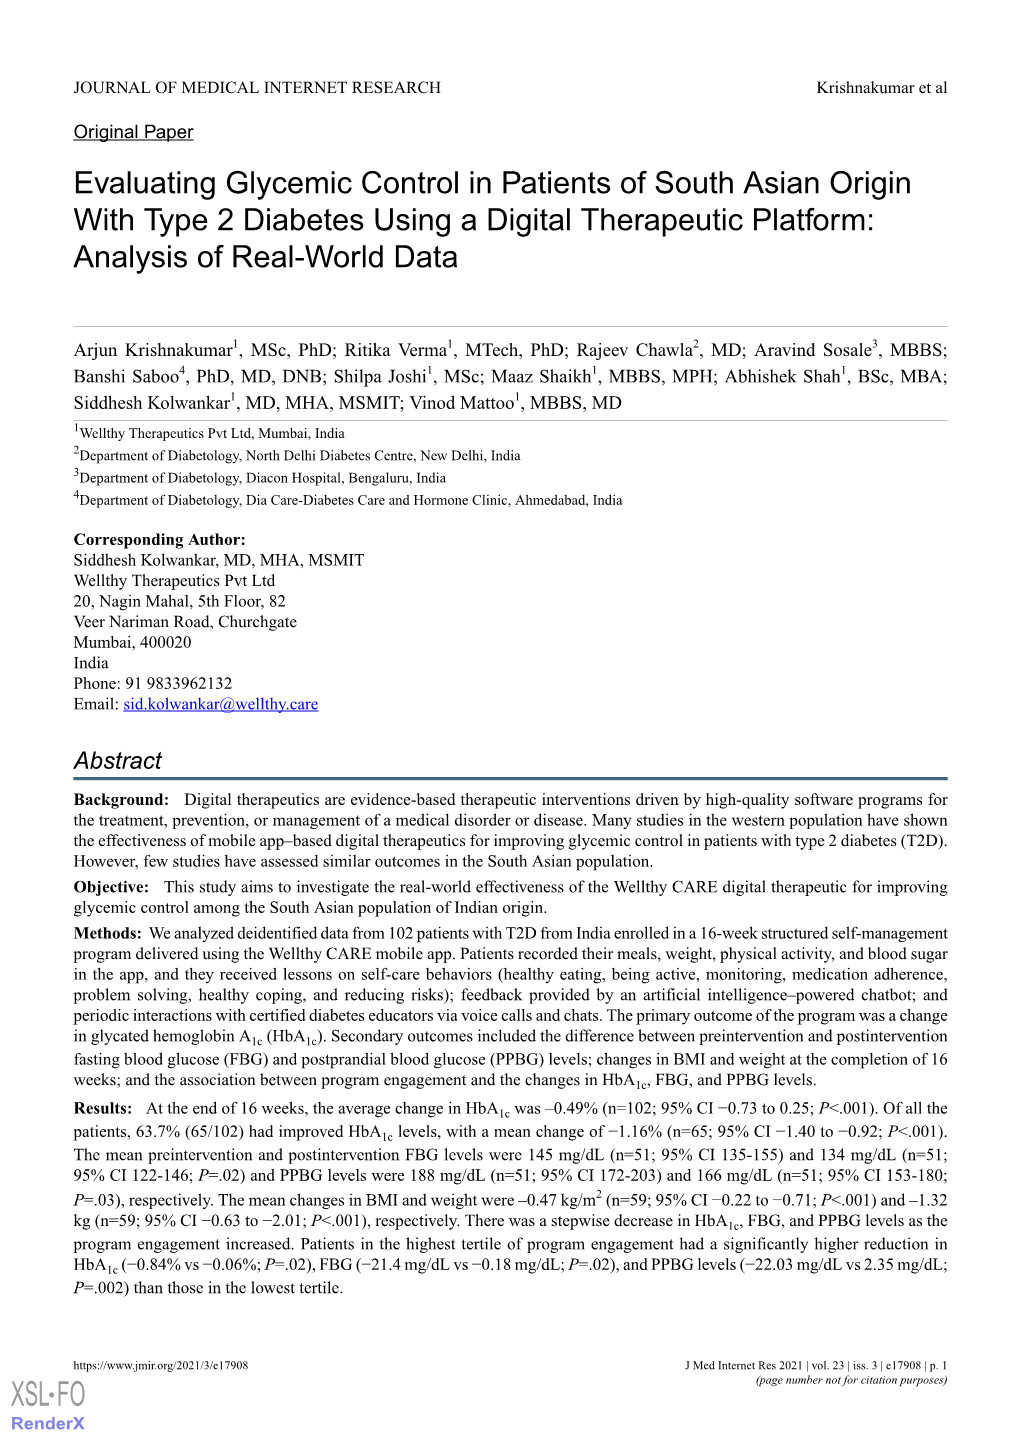 Evaluating Glycemic Control in Patients of South Asian Origin with Type 2 Diabetes Using a Digital Therapeutic Platform: Analysis of Real-World Data